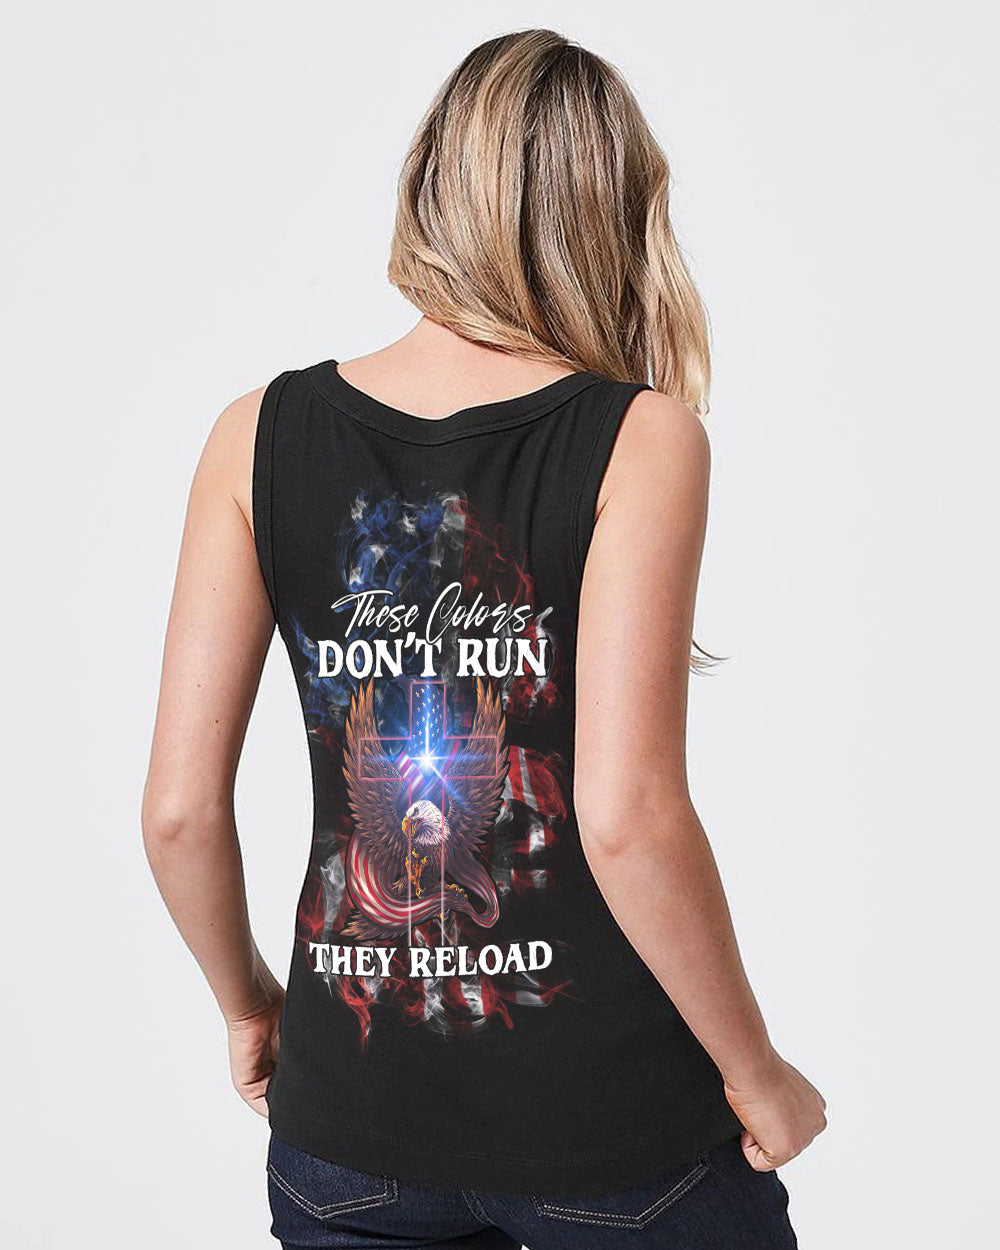 These Colors Don't Run They Reload Eagle Wings Cross Flag Women's Christian Tanks